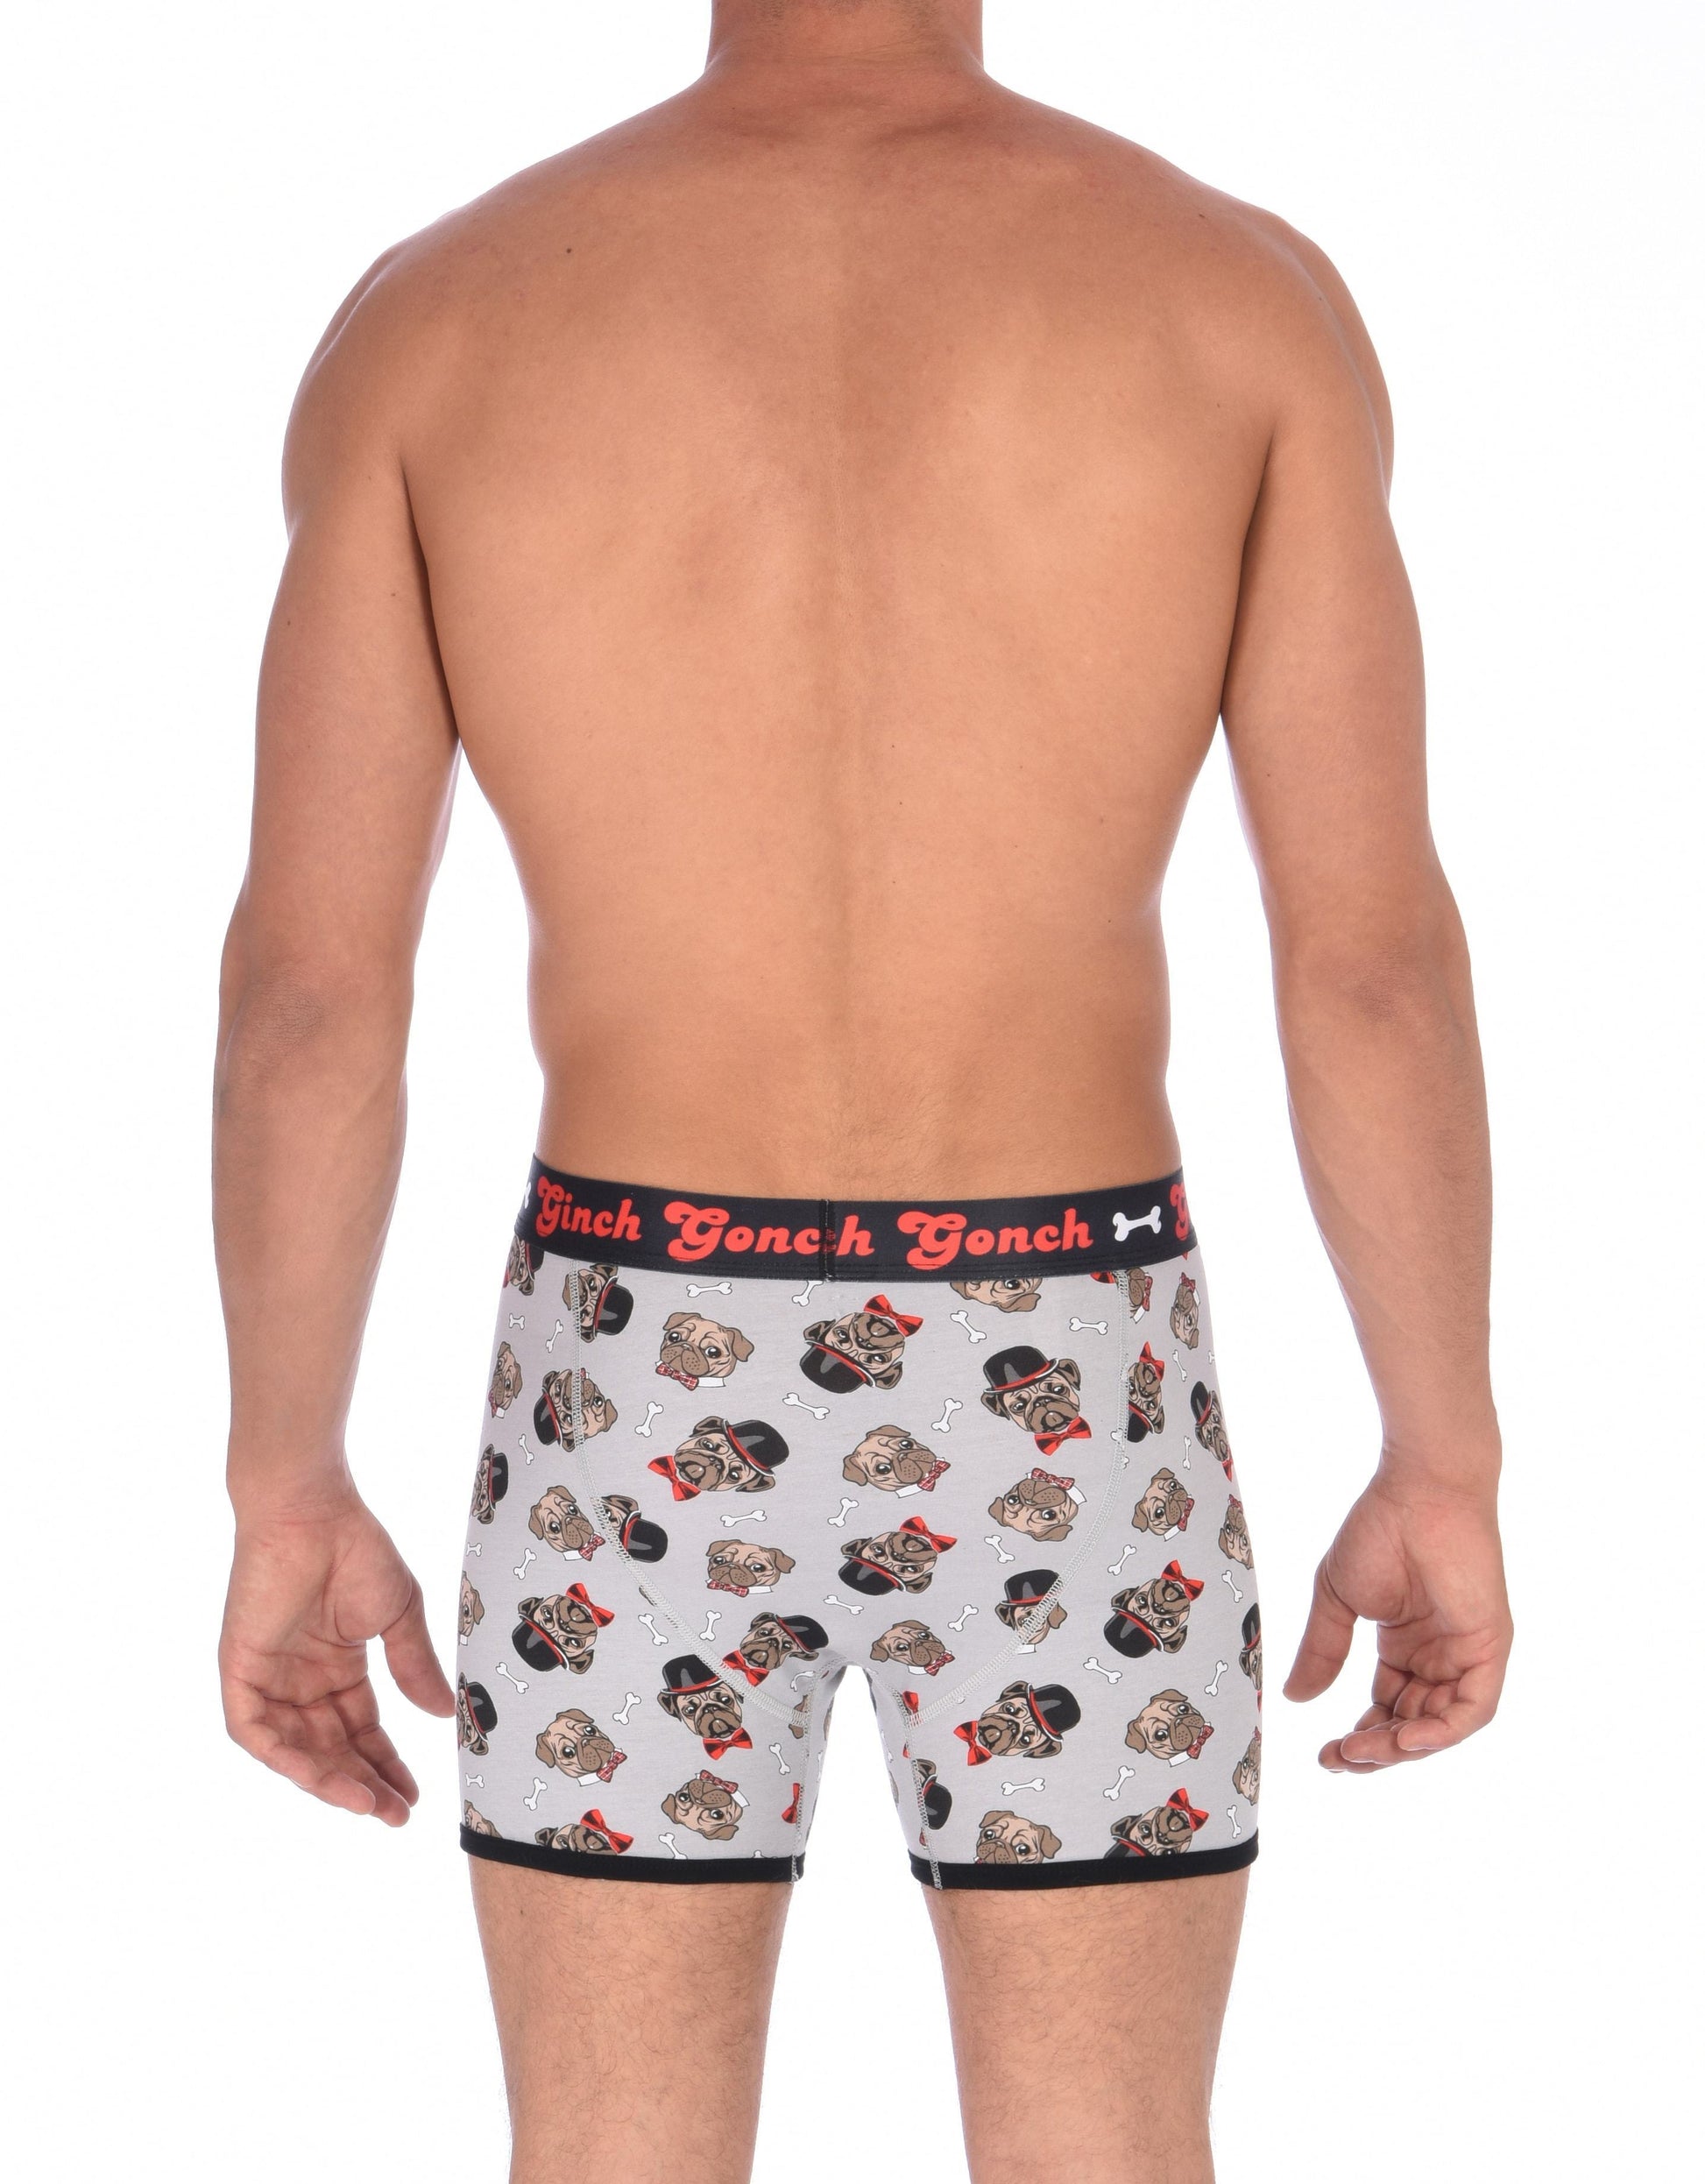 GG Ginch Gonch Pug Life Boxer Brief trunk - Men's Underwear grey background with pugs with top hats and bow ties and bones. Black trim with black printed waistband back